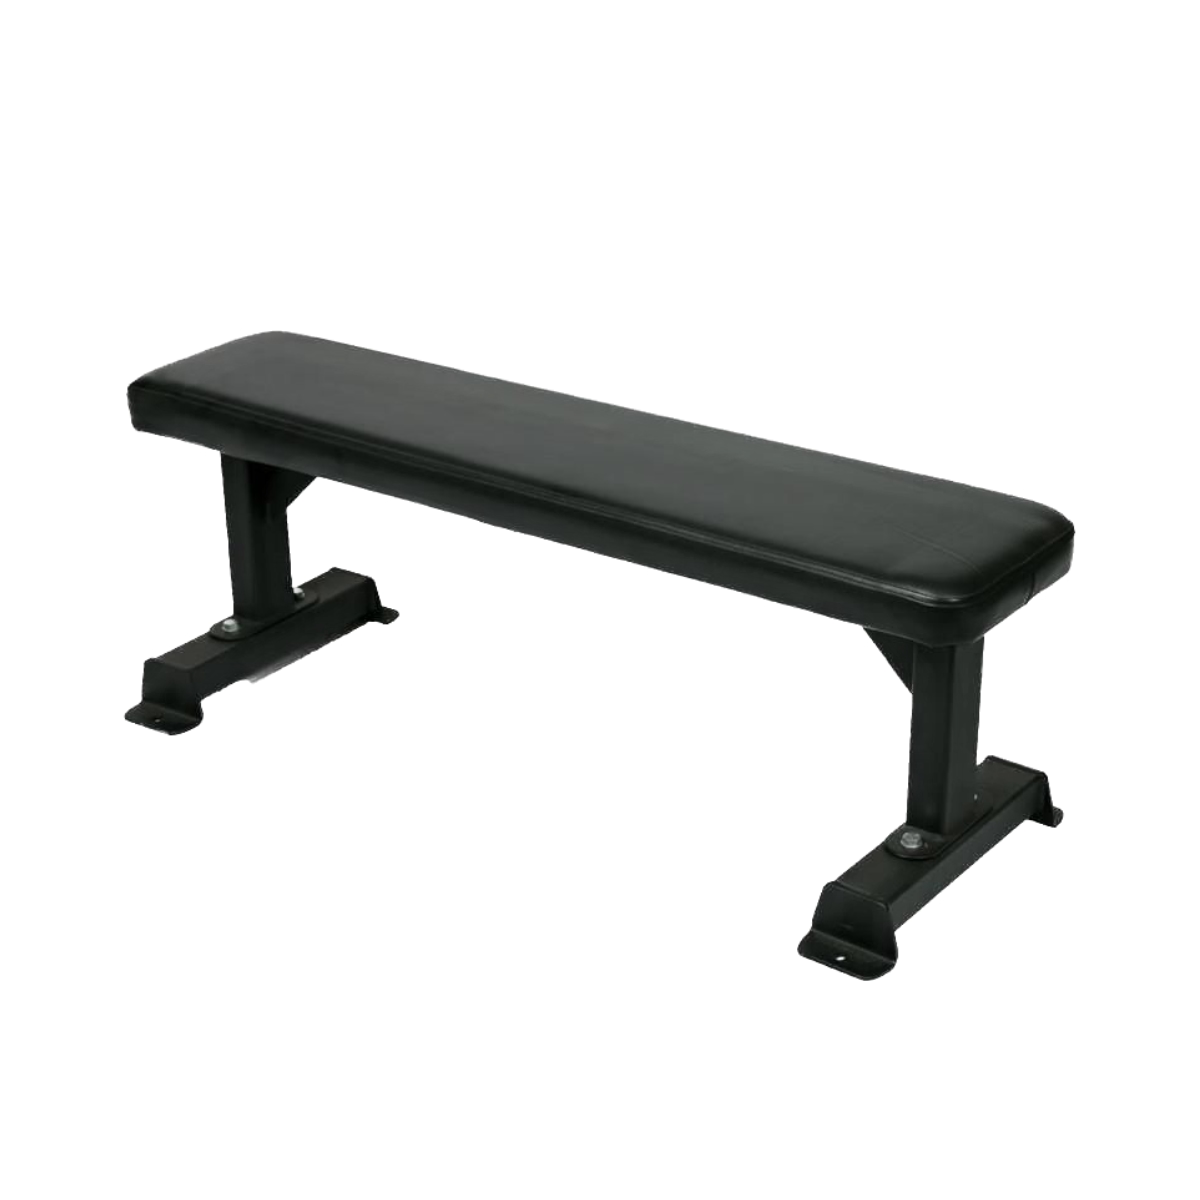 American Barbell Flat Utility Bench